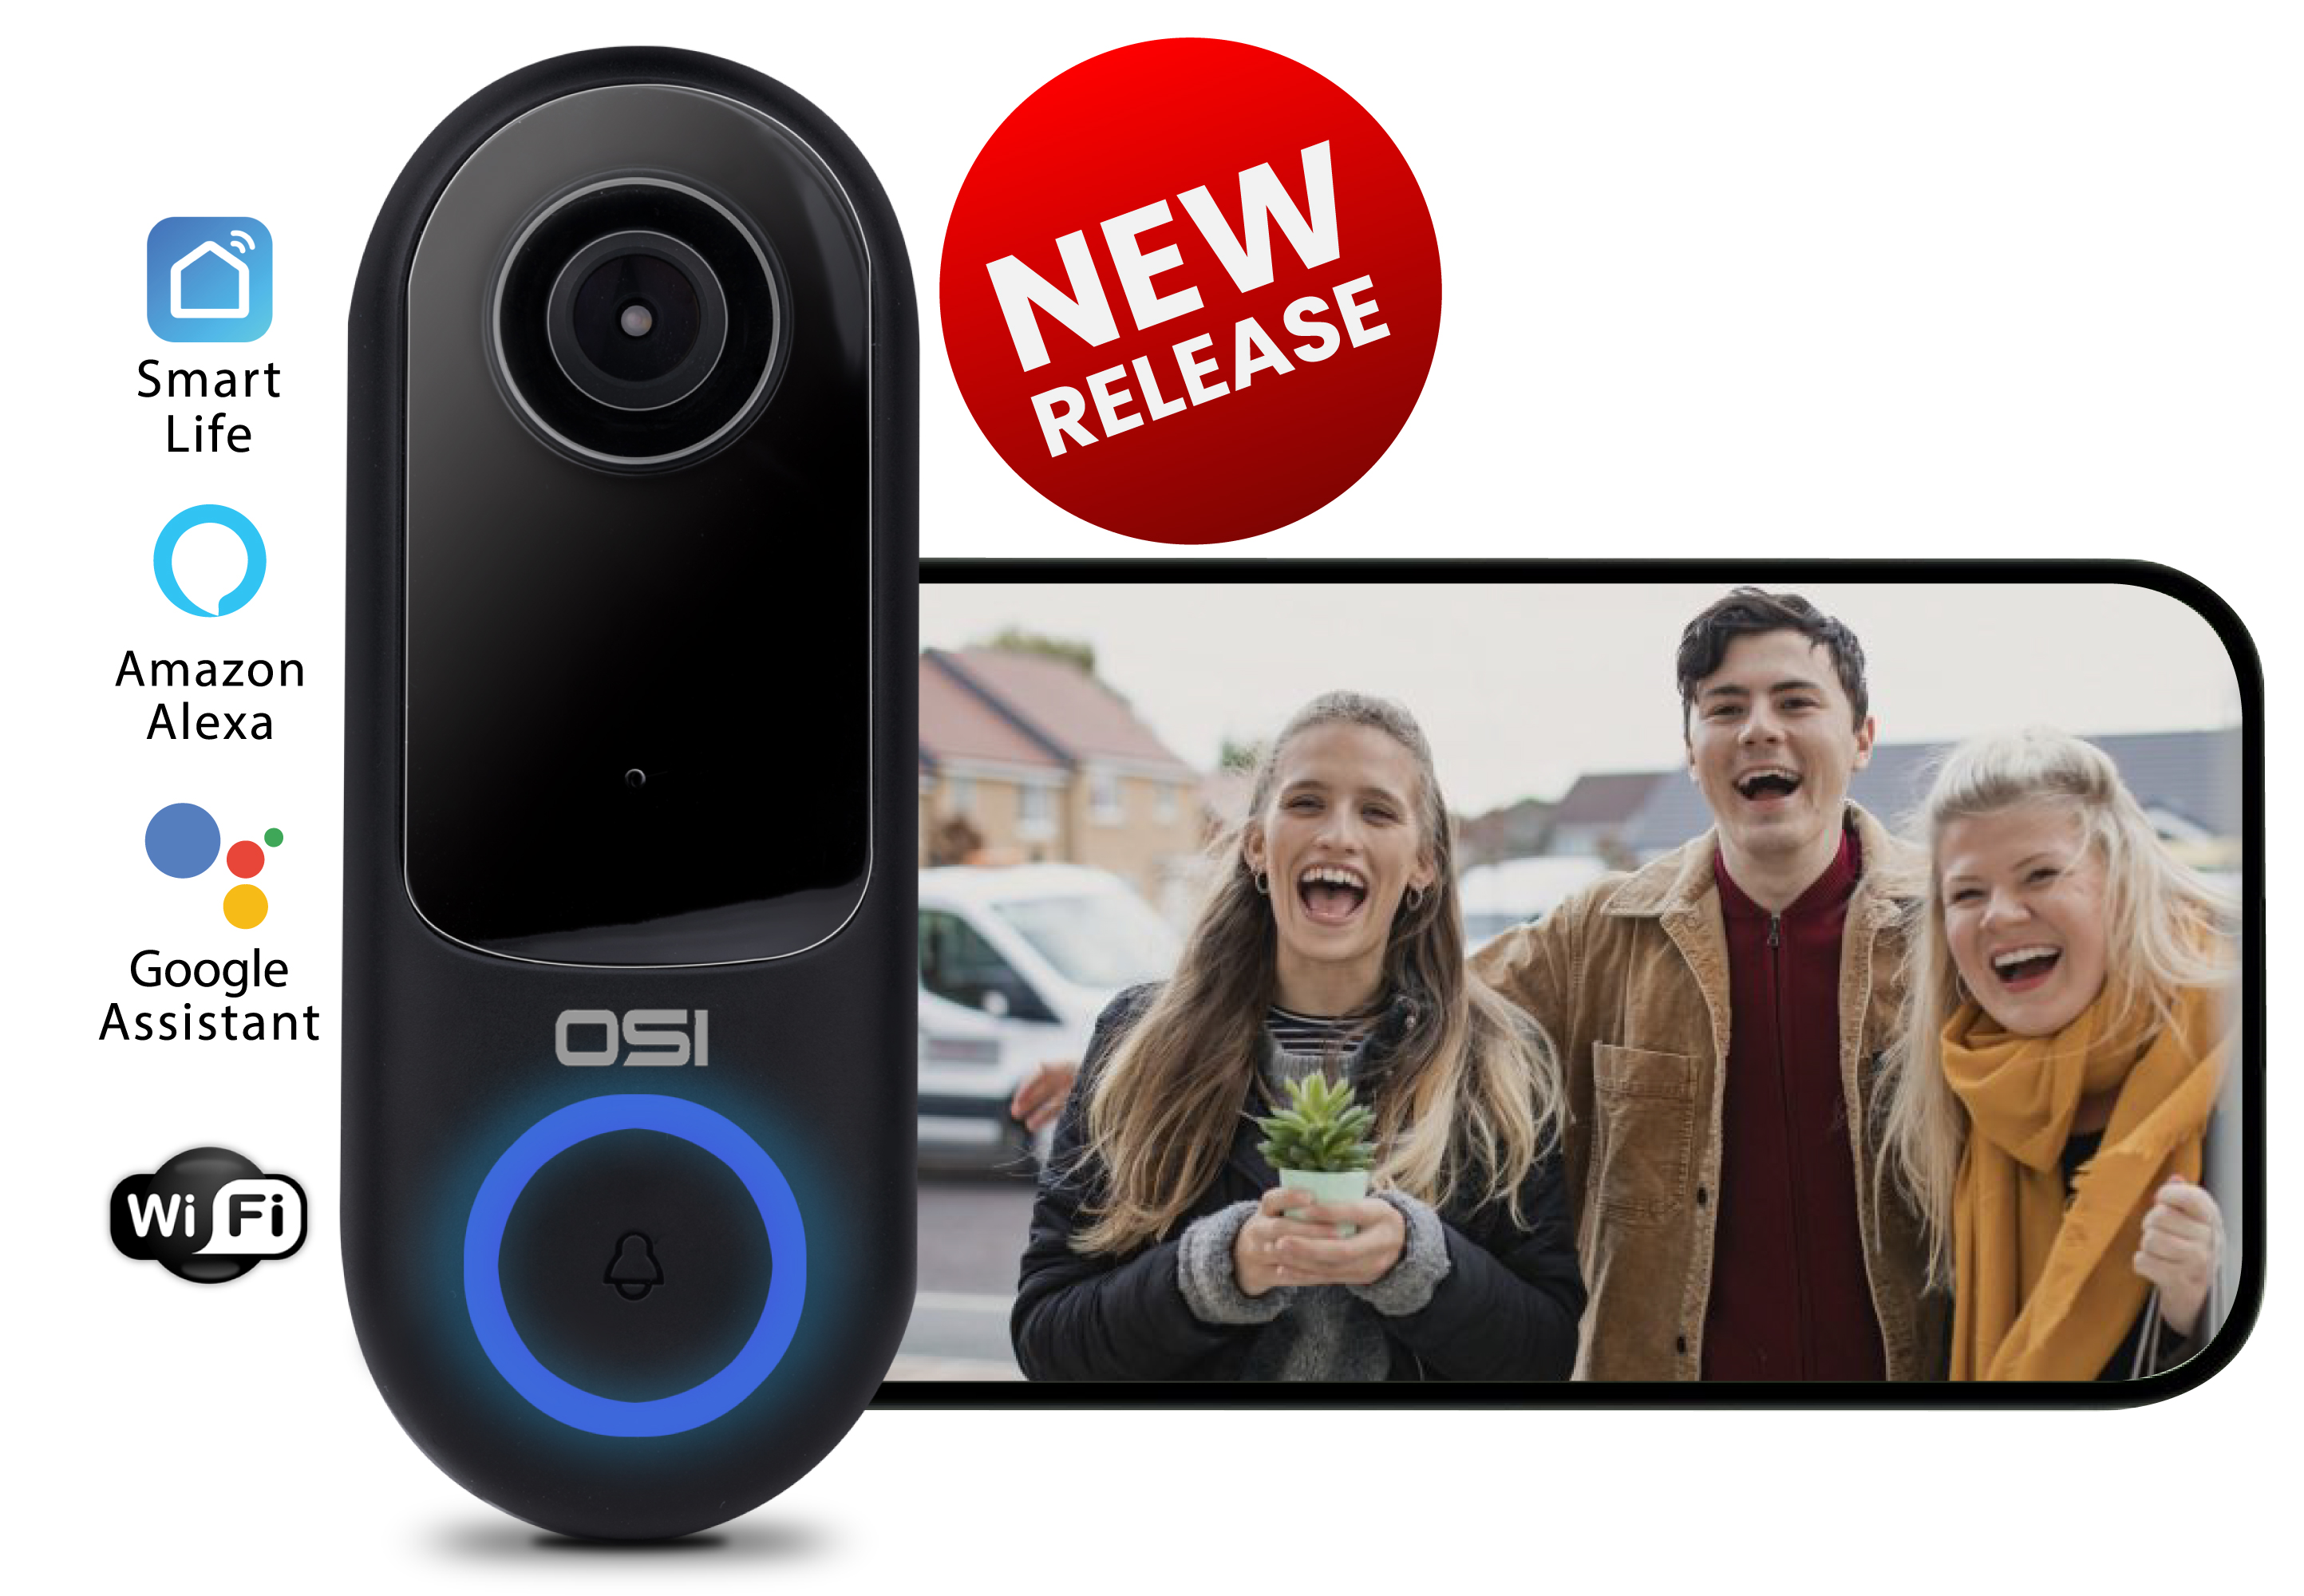 OSI Smart Wi-Fi Video Doorbell Camera (AC Wired) Questions & Answers